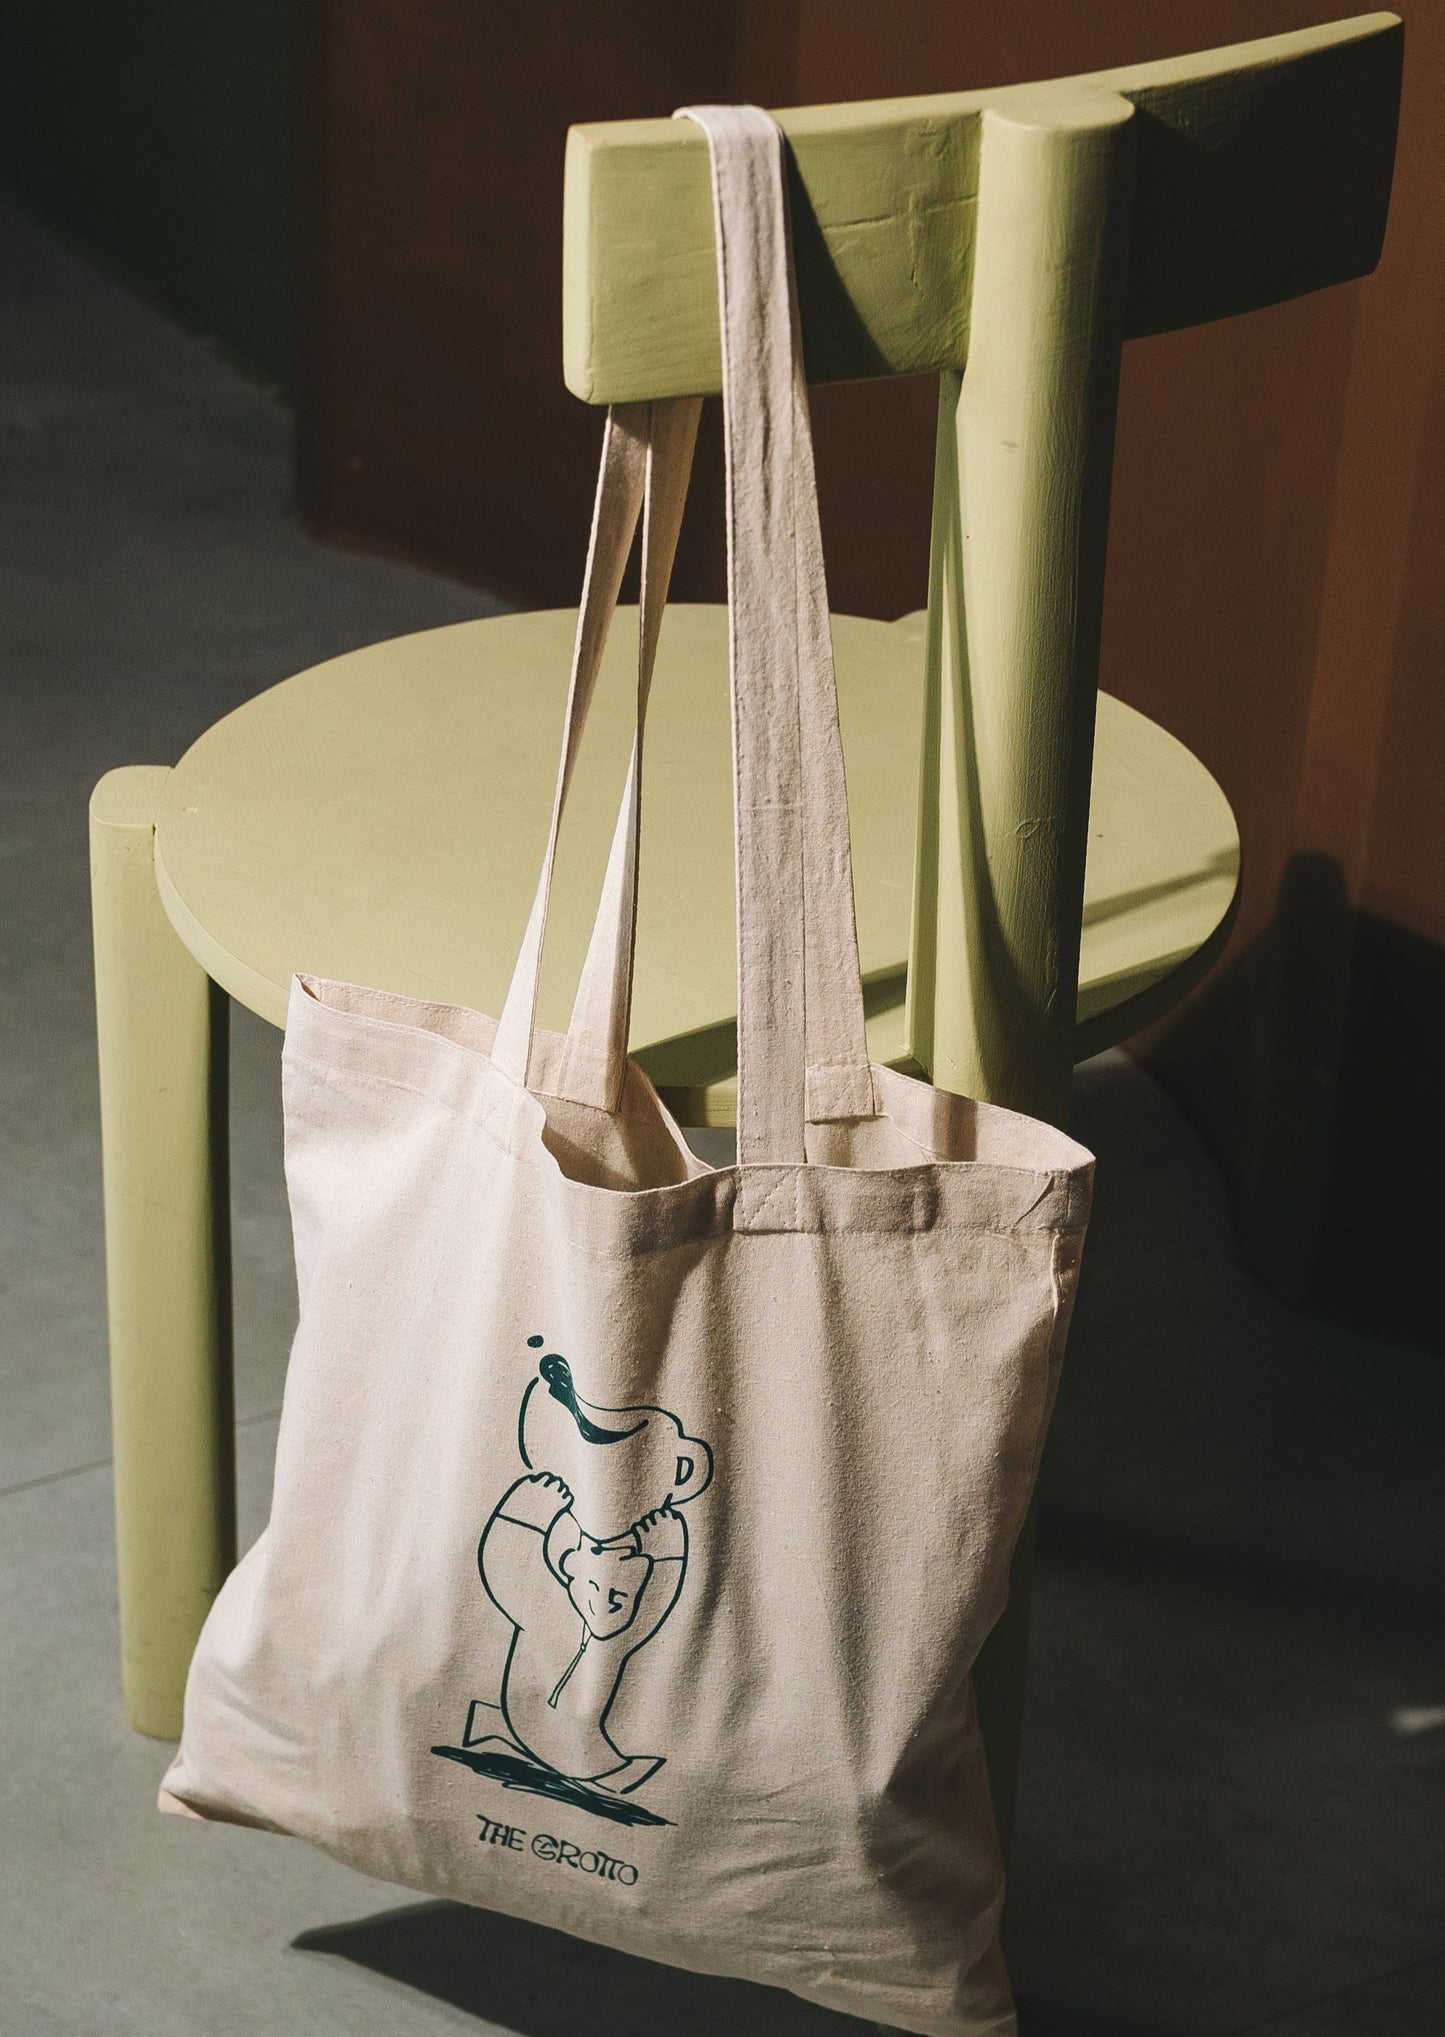 The Grotto Sikka Tote